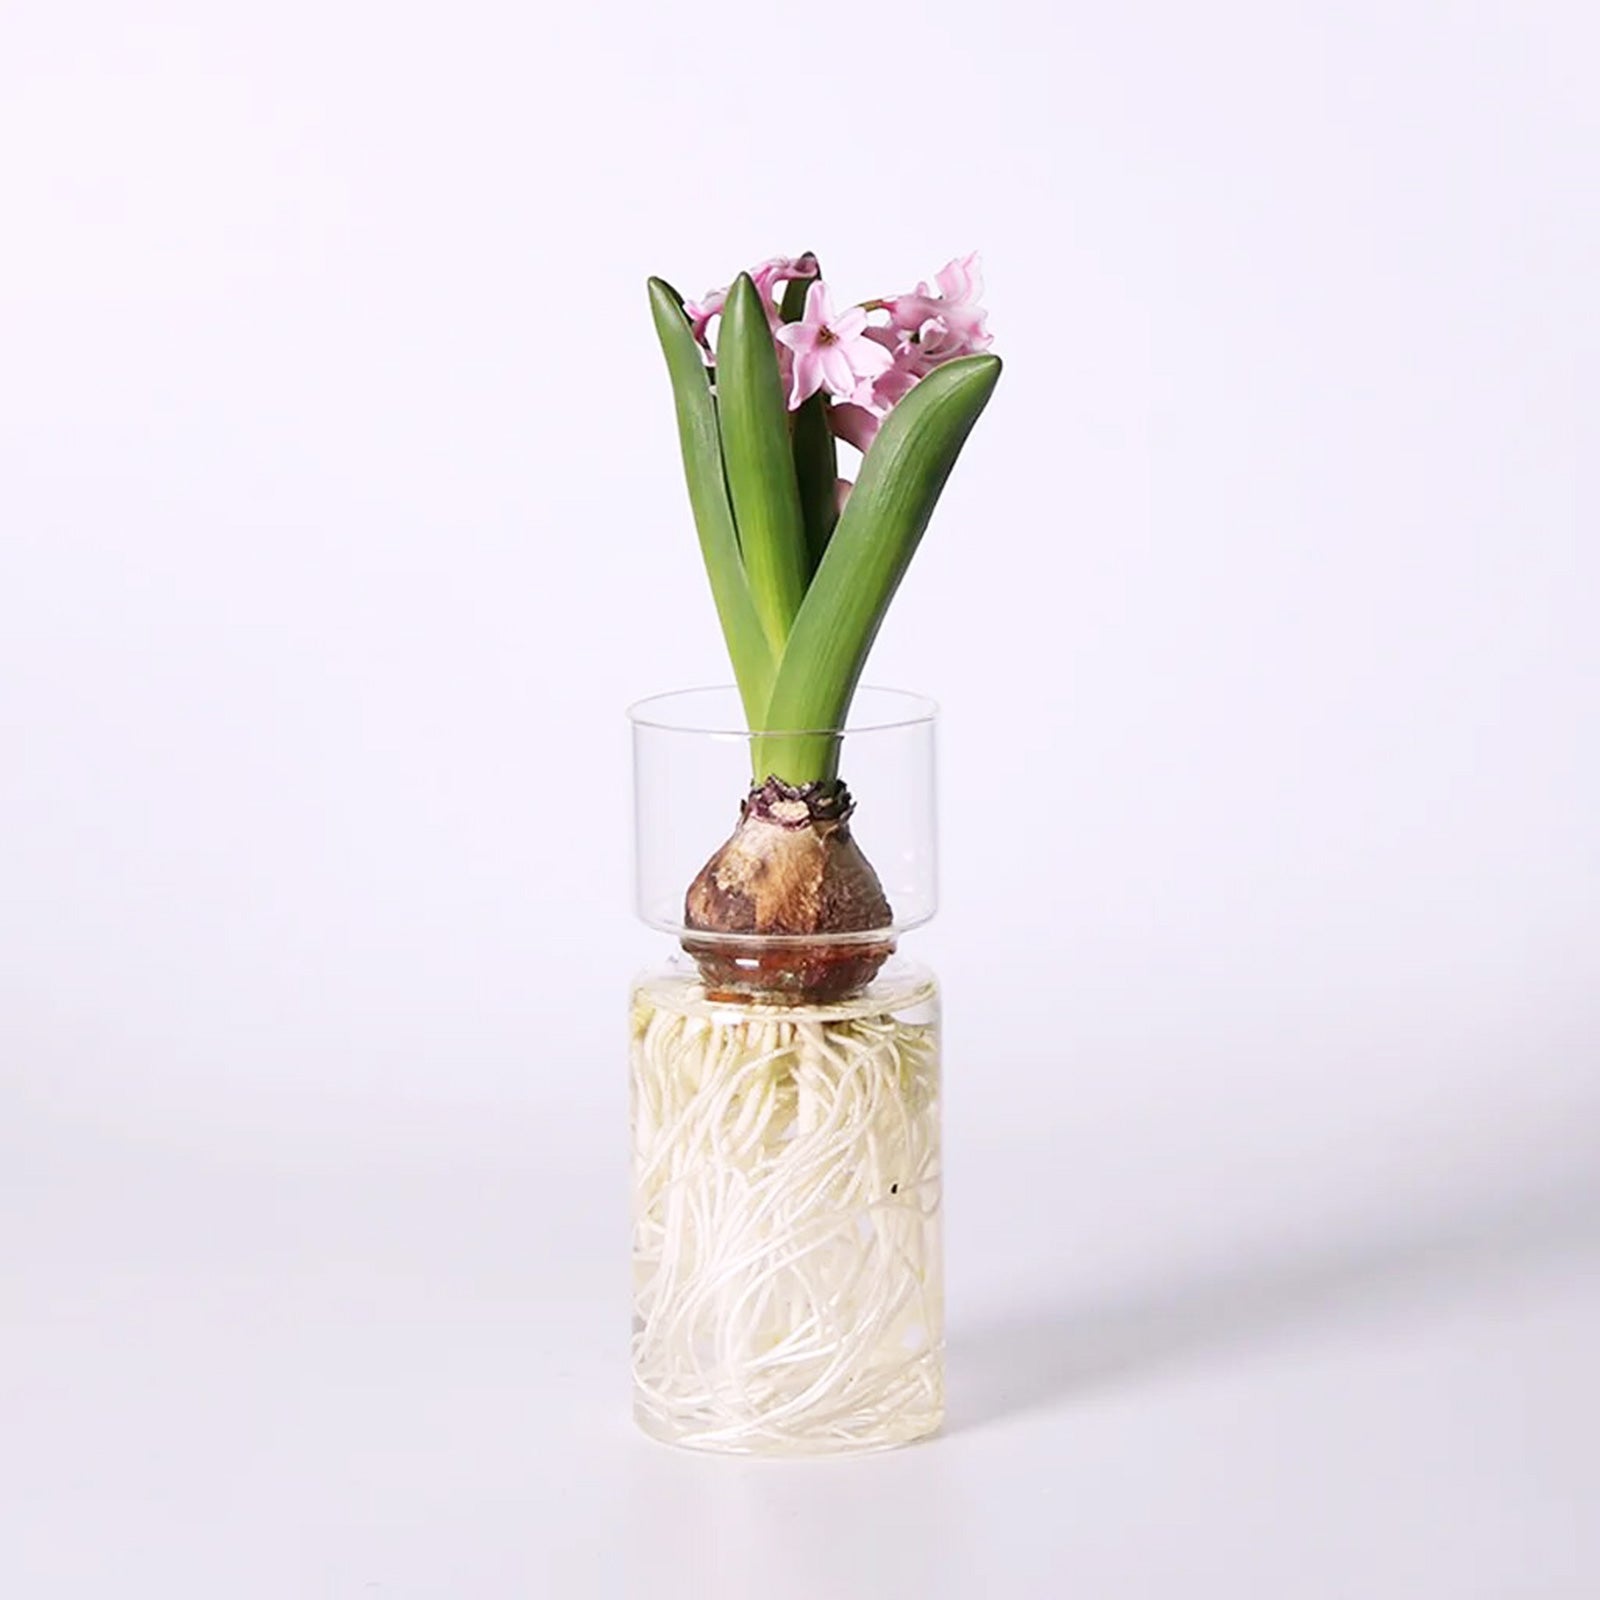 Decorative Glass Vase for Your Hydroponic Delights